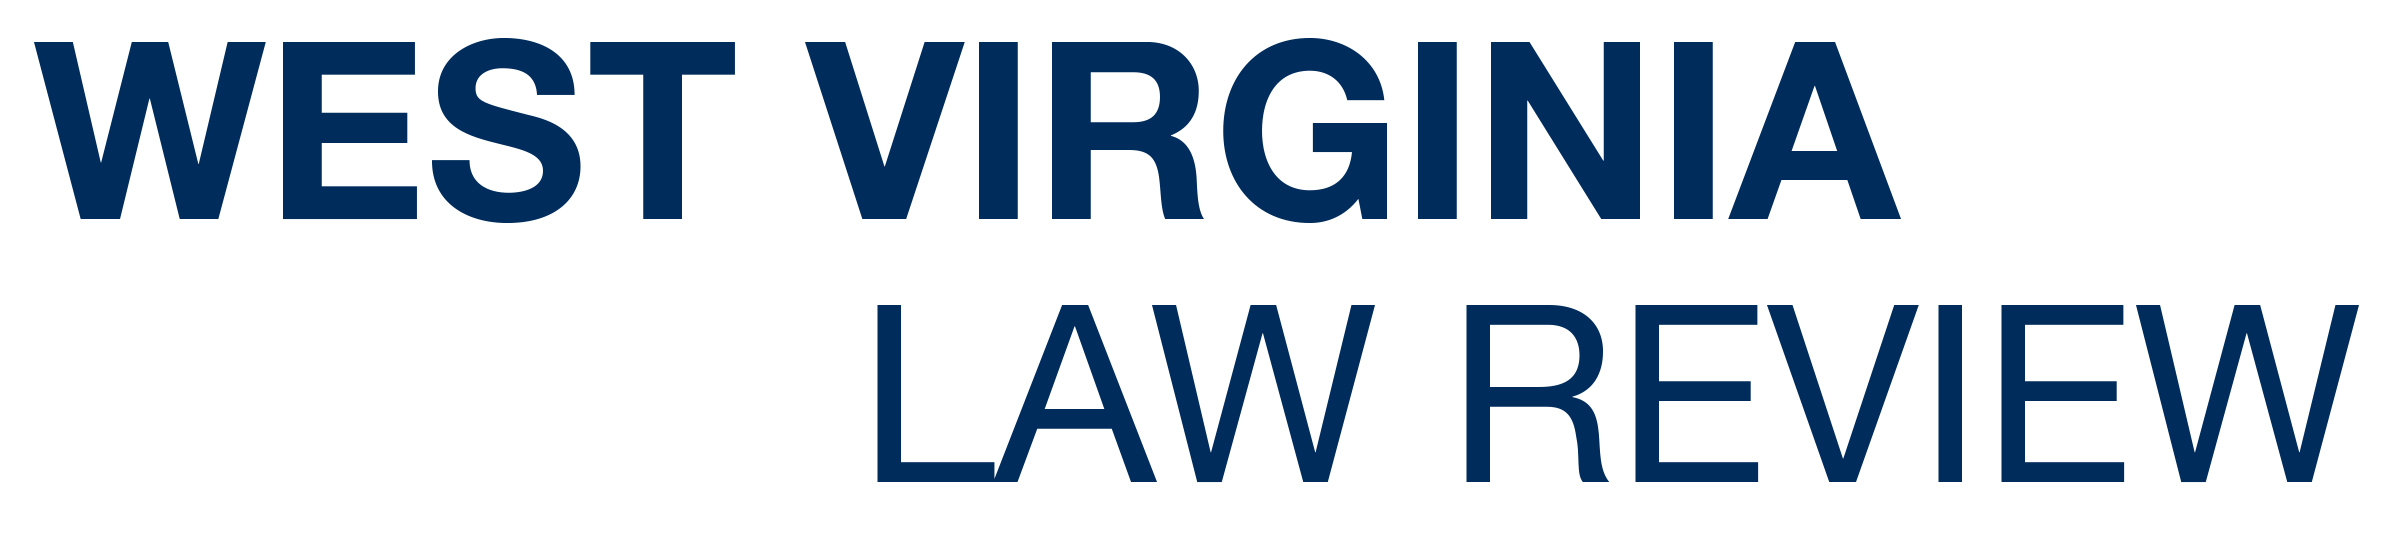 West Virginia Law Review